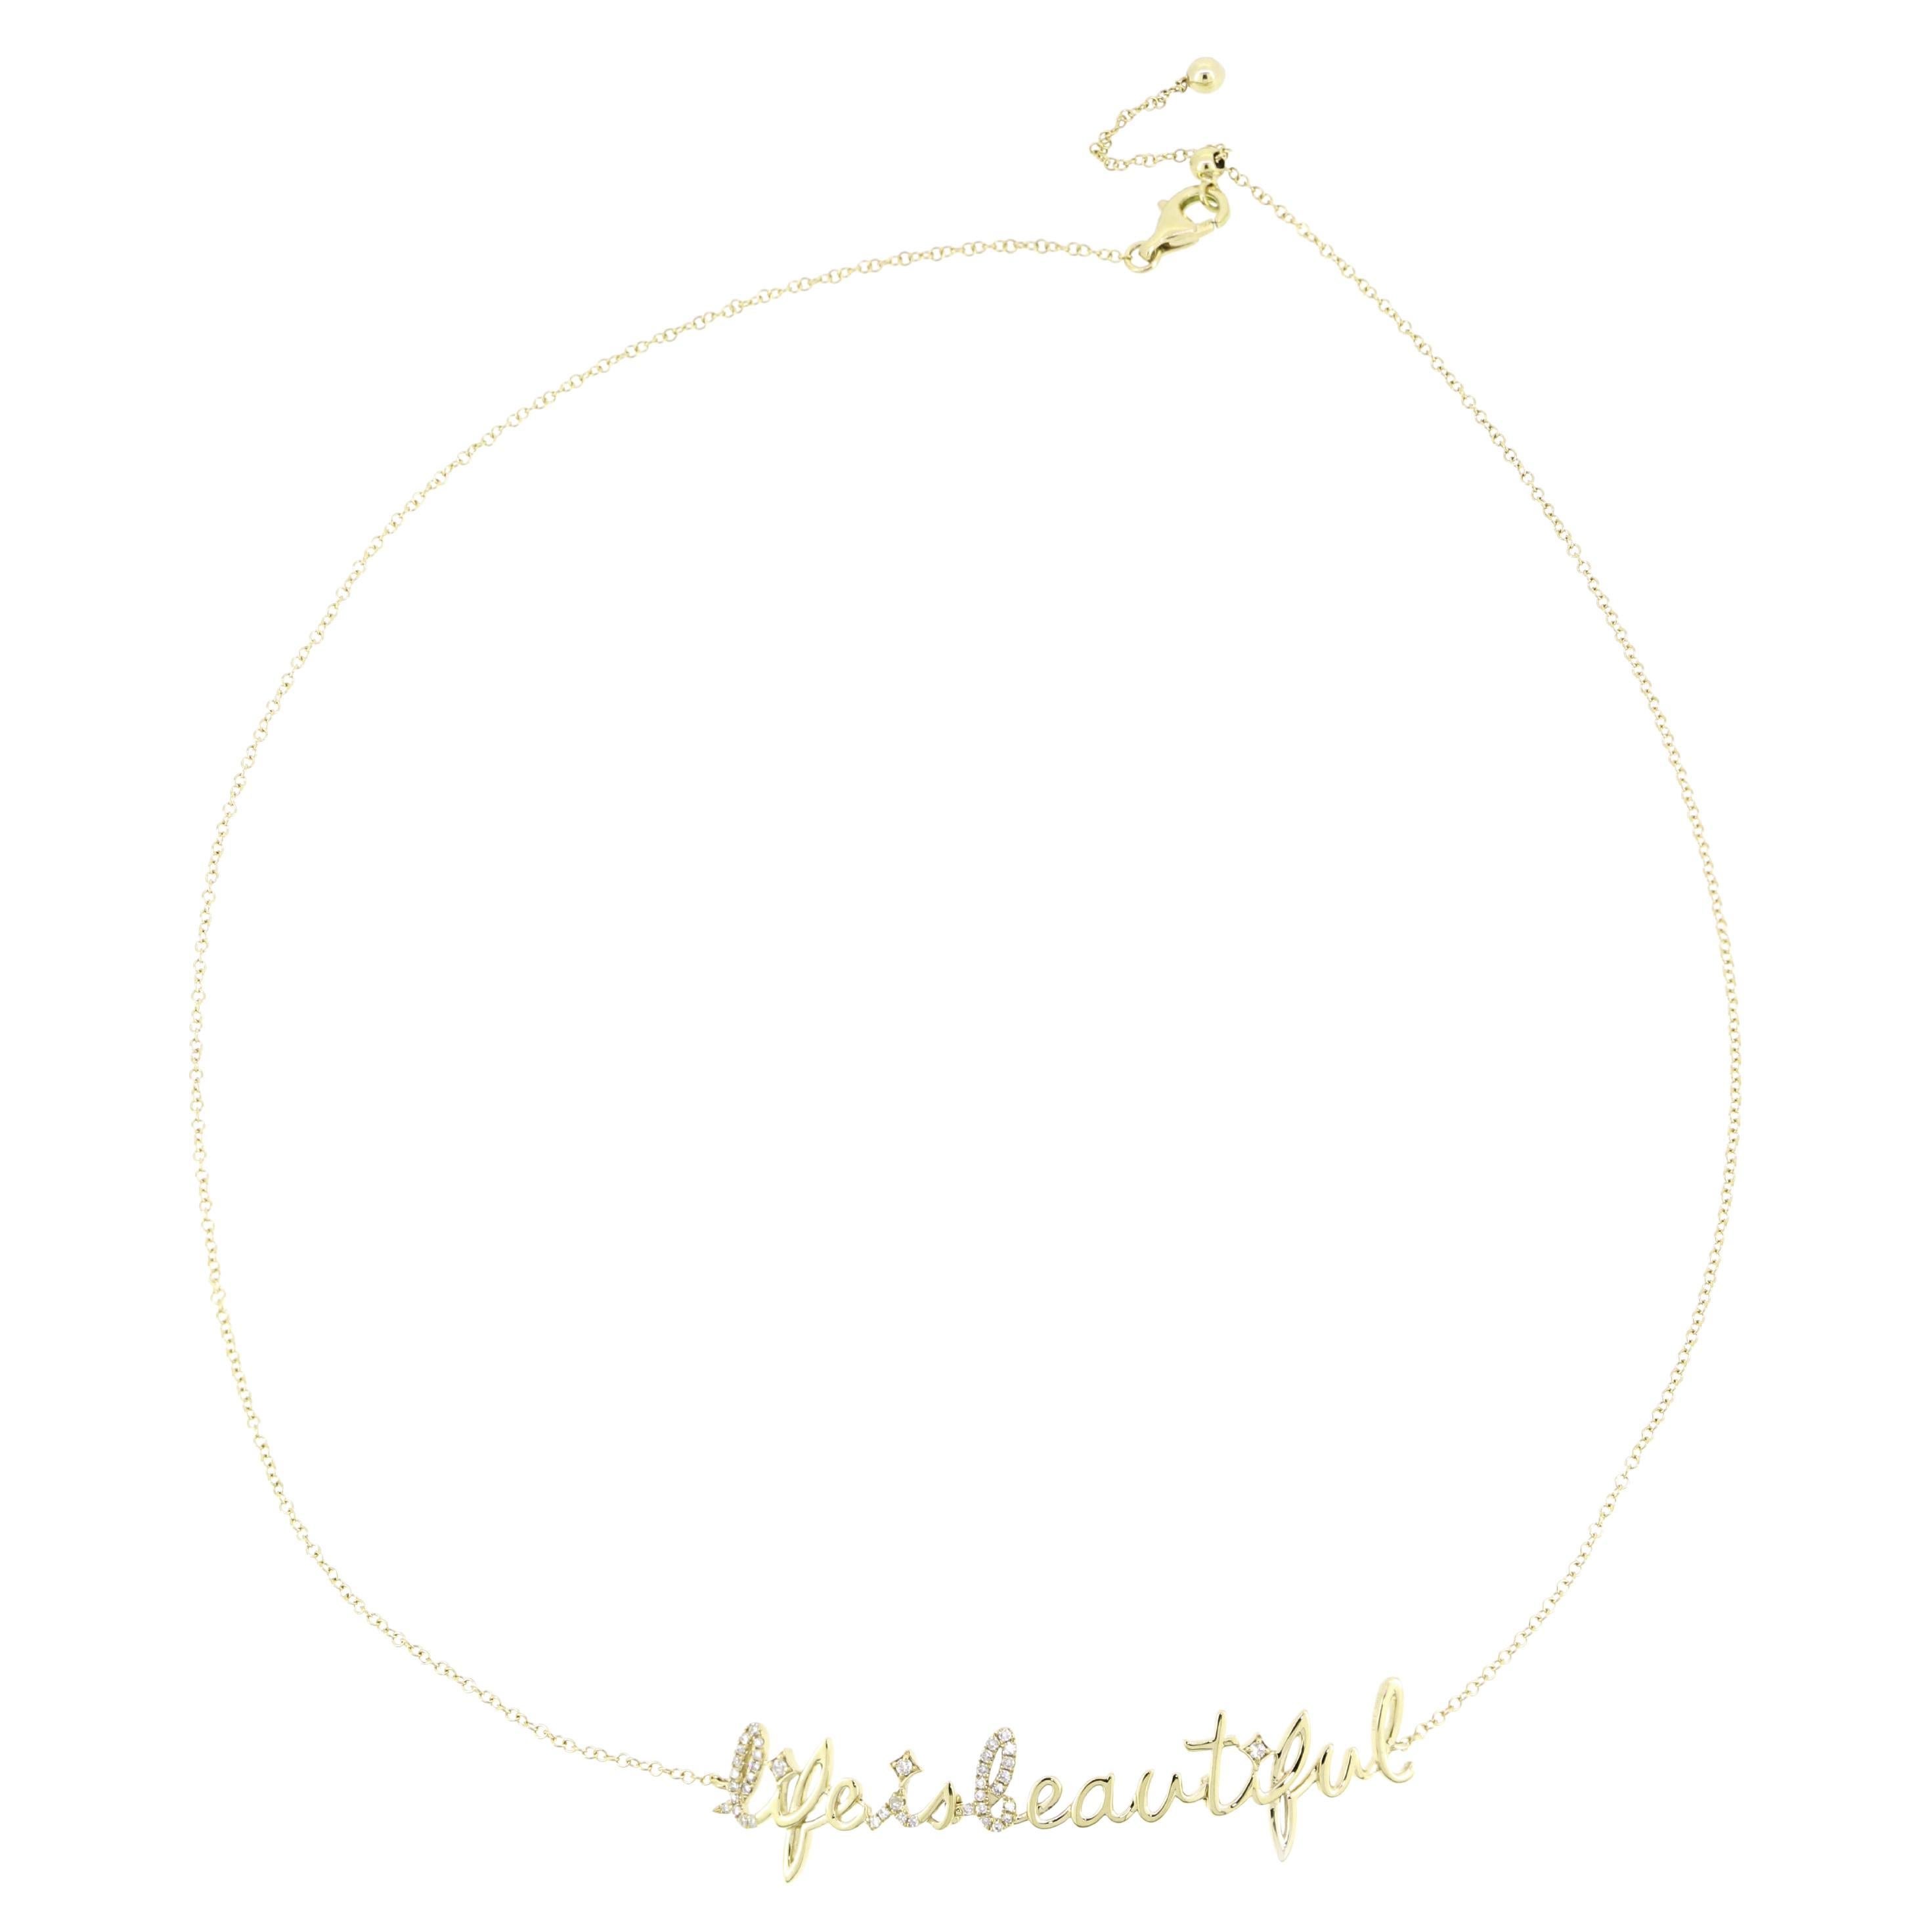 Luxle 1/8 Carat T.W. Diamond "Life is Beautiful" Necklace in 14k Gold 